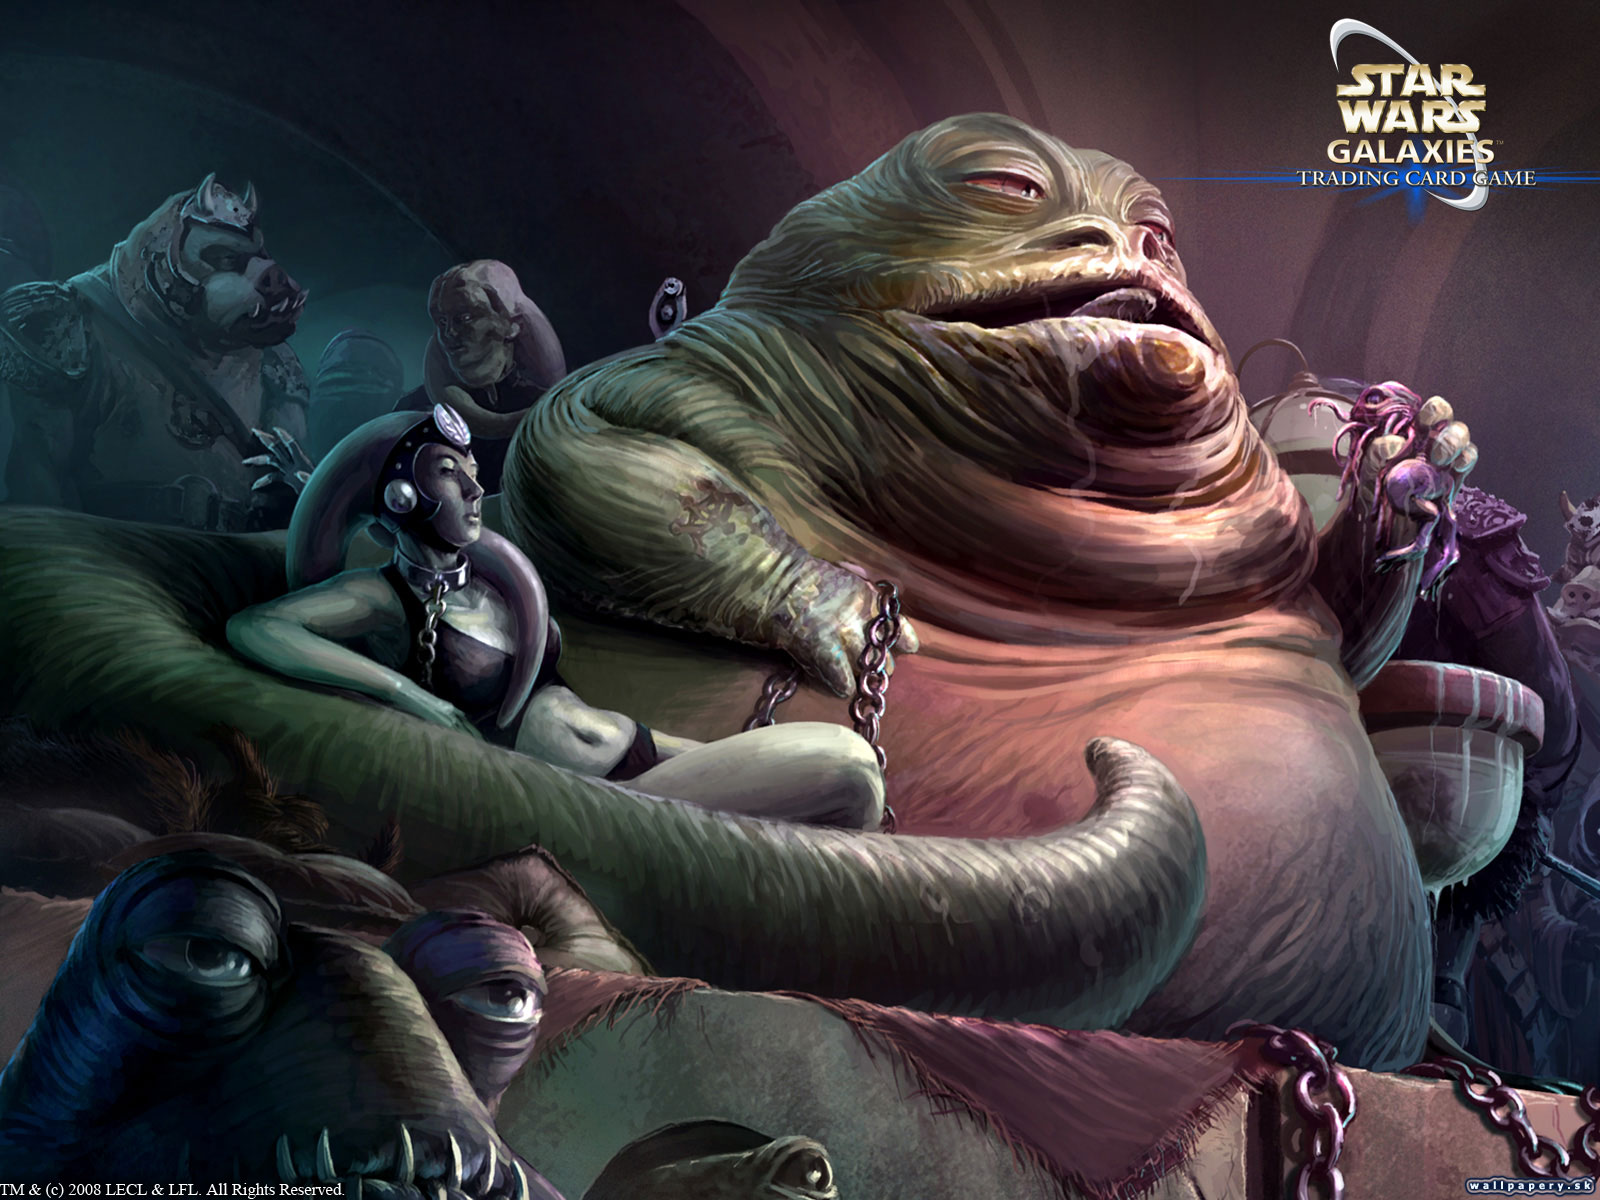 Star Wars Galaxies - Trading Card Game: Champions of the Force - wallpaper 20